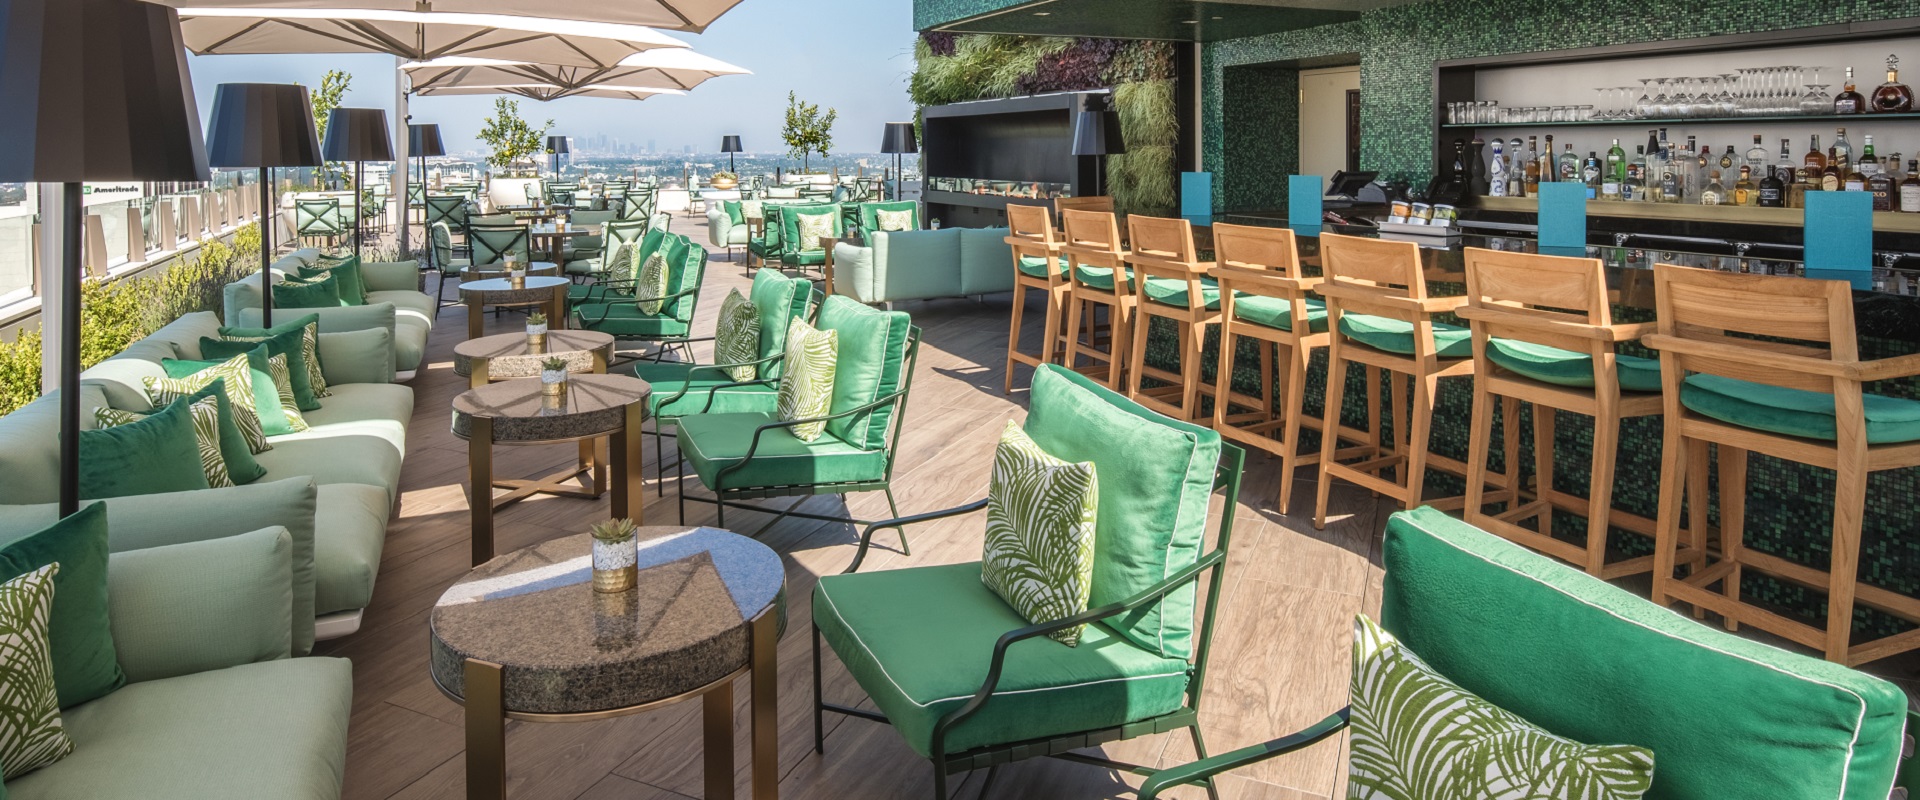 5 Best Dining Spots in Los Angeles with a View